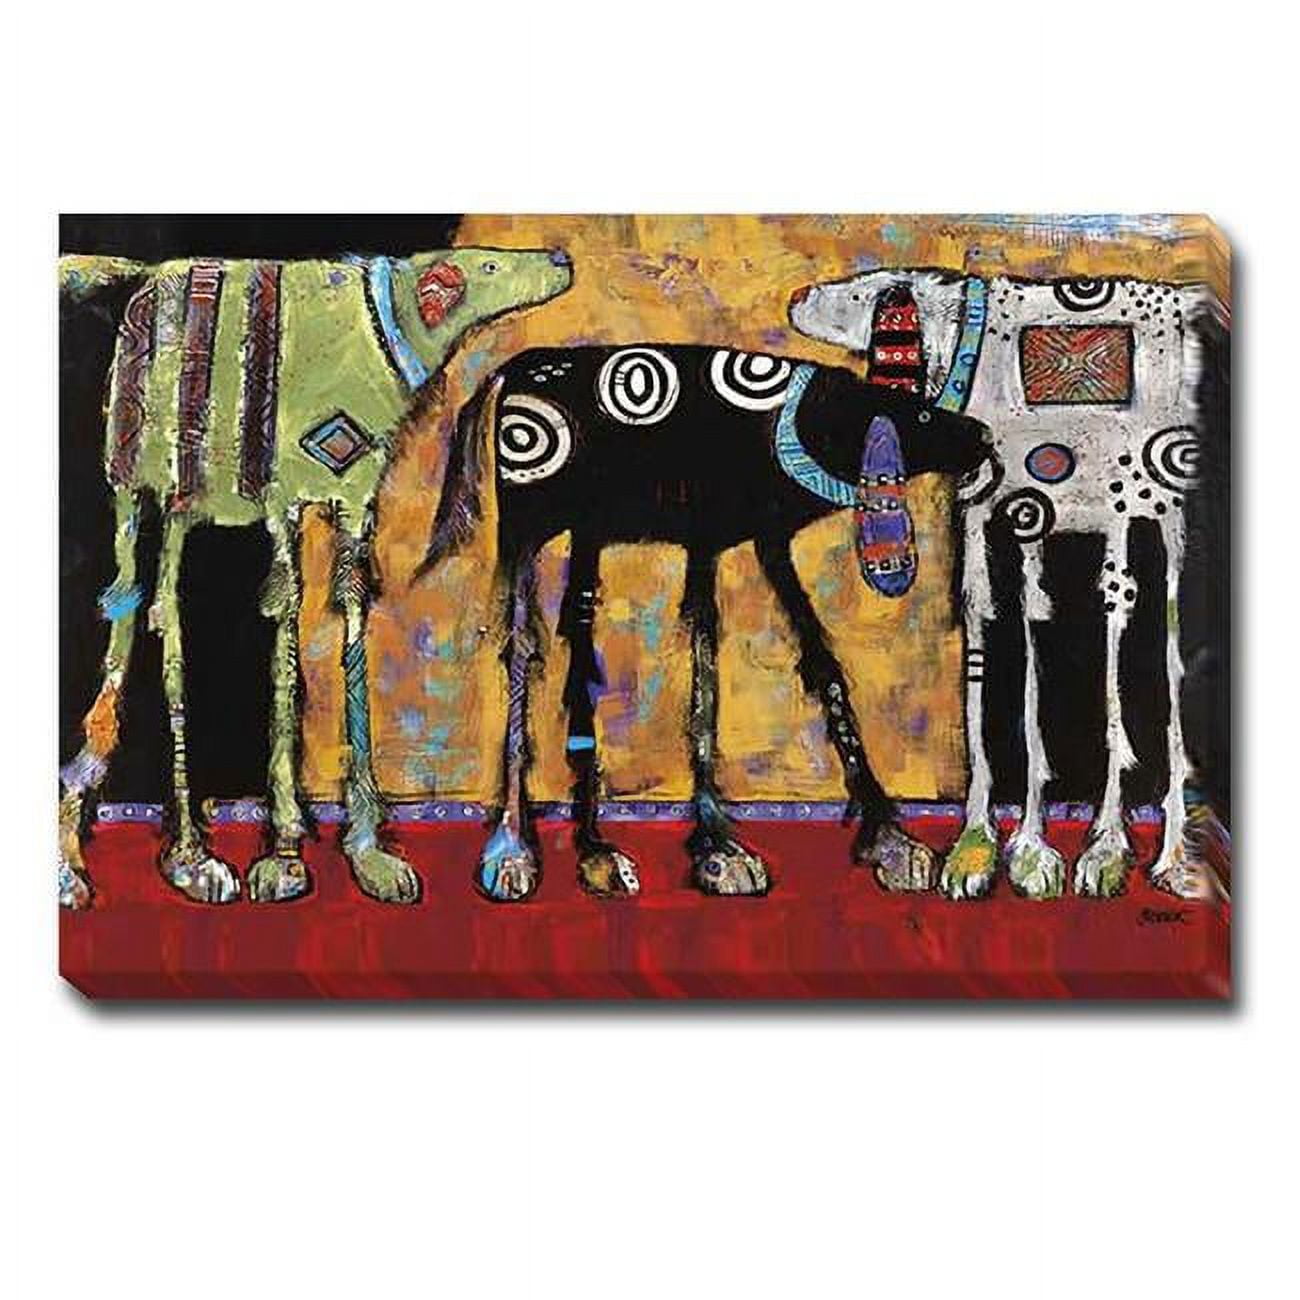 12184646eg Looking For Trouble By Jenny Foster Premium Gallery-wrapped Canvas Giclee Art - 12 X 18 In.